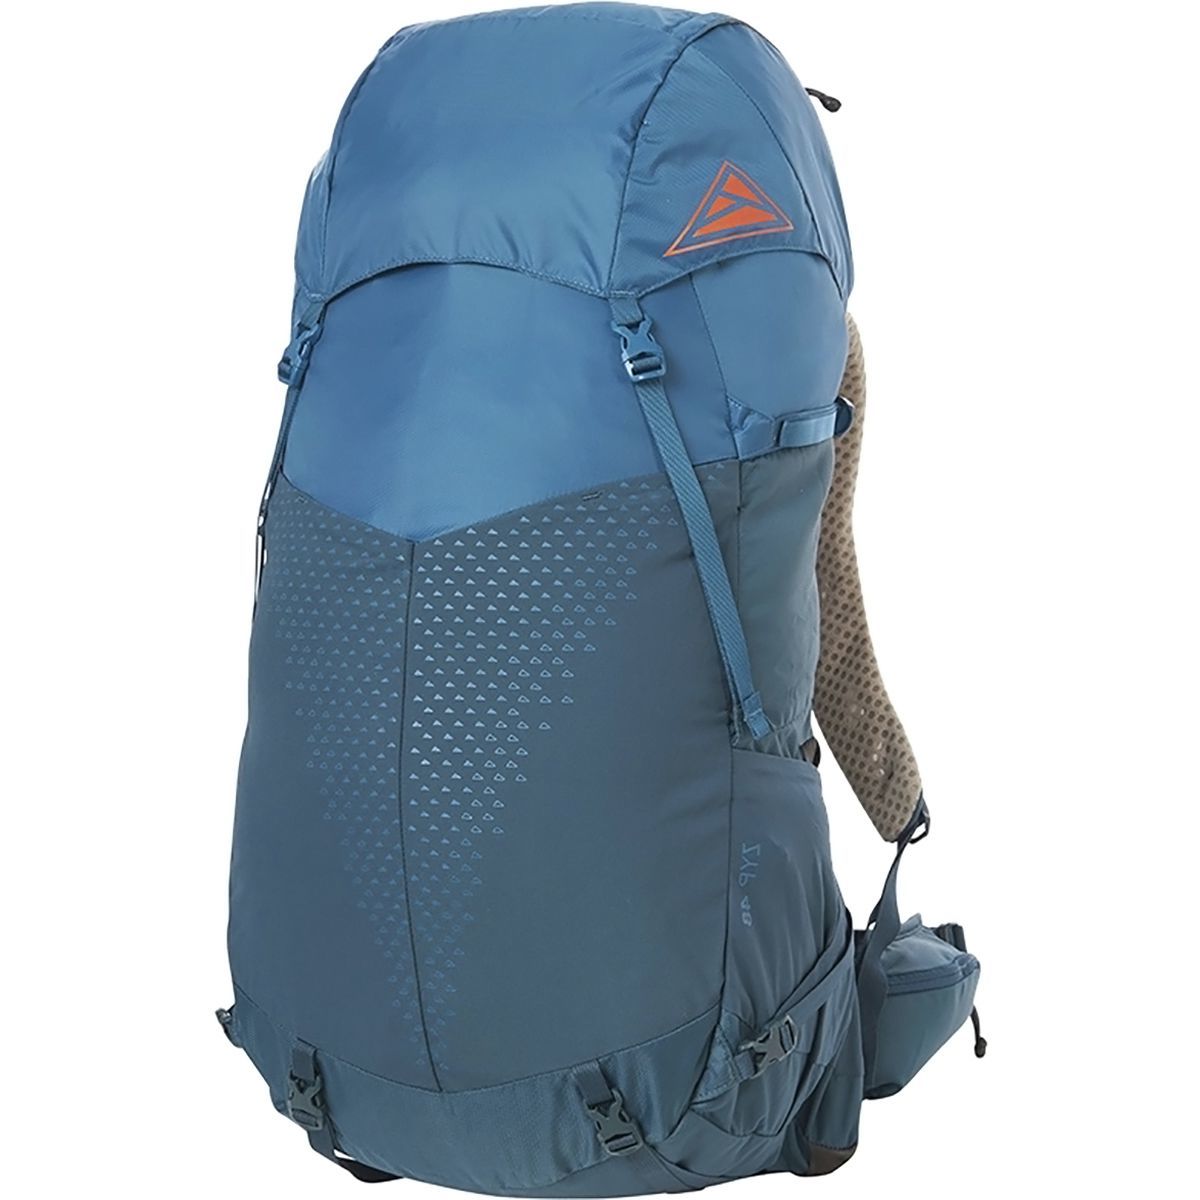 Kelty Zyp 48L Backpack